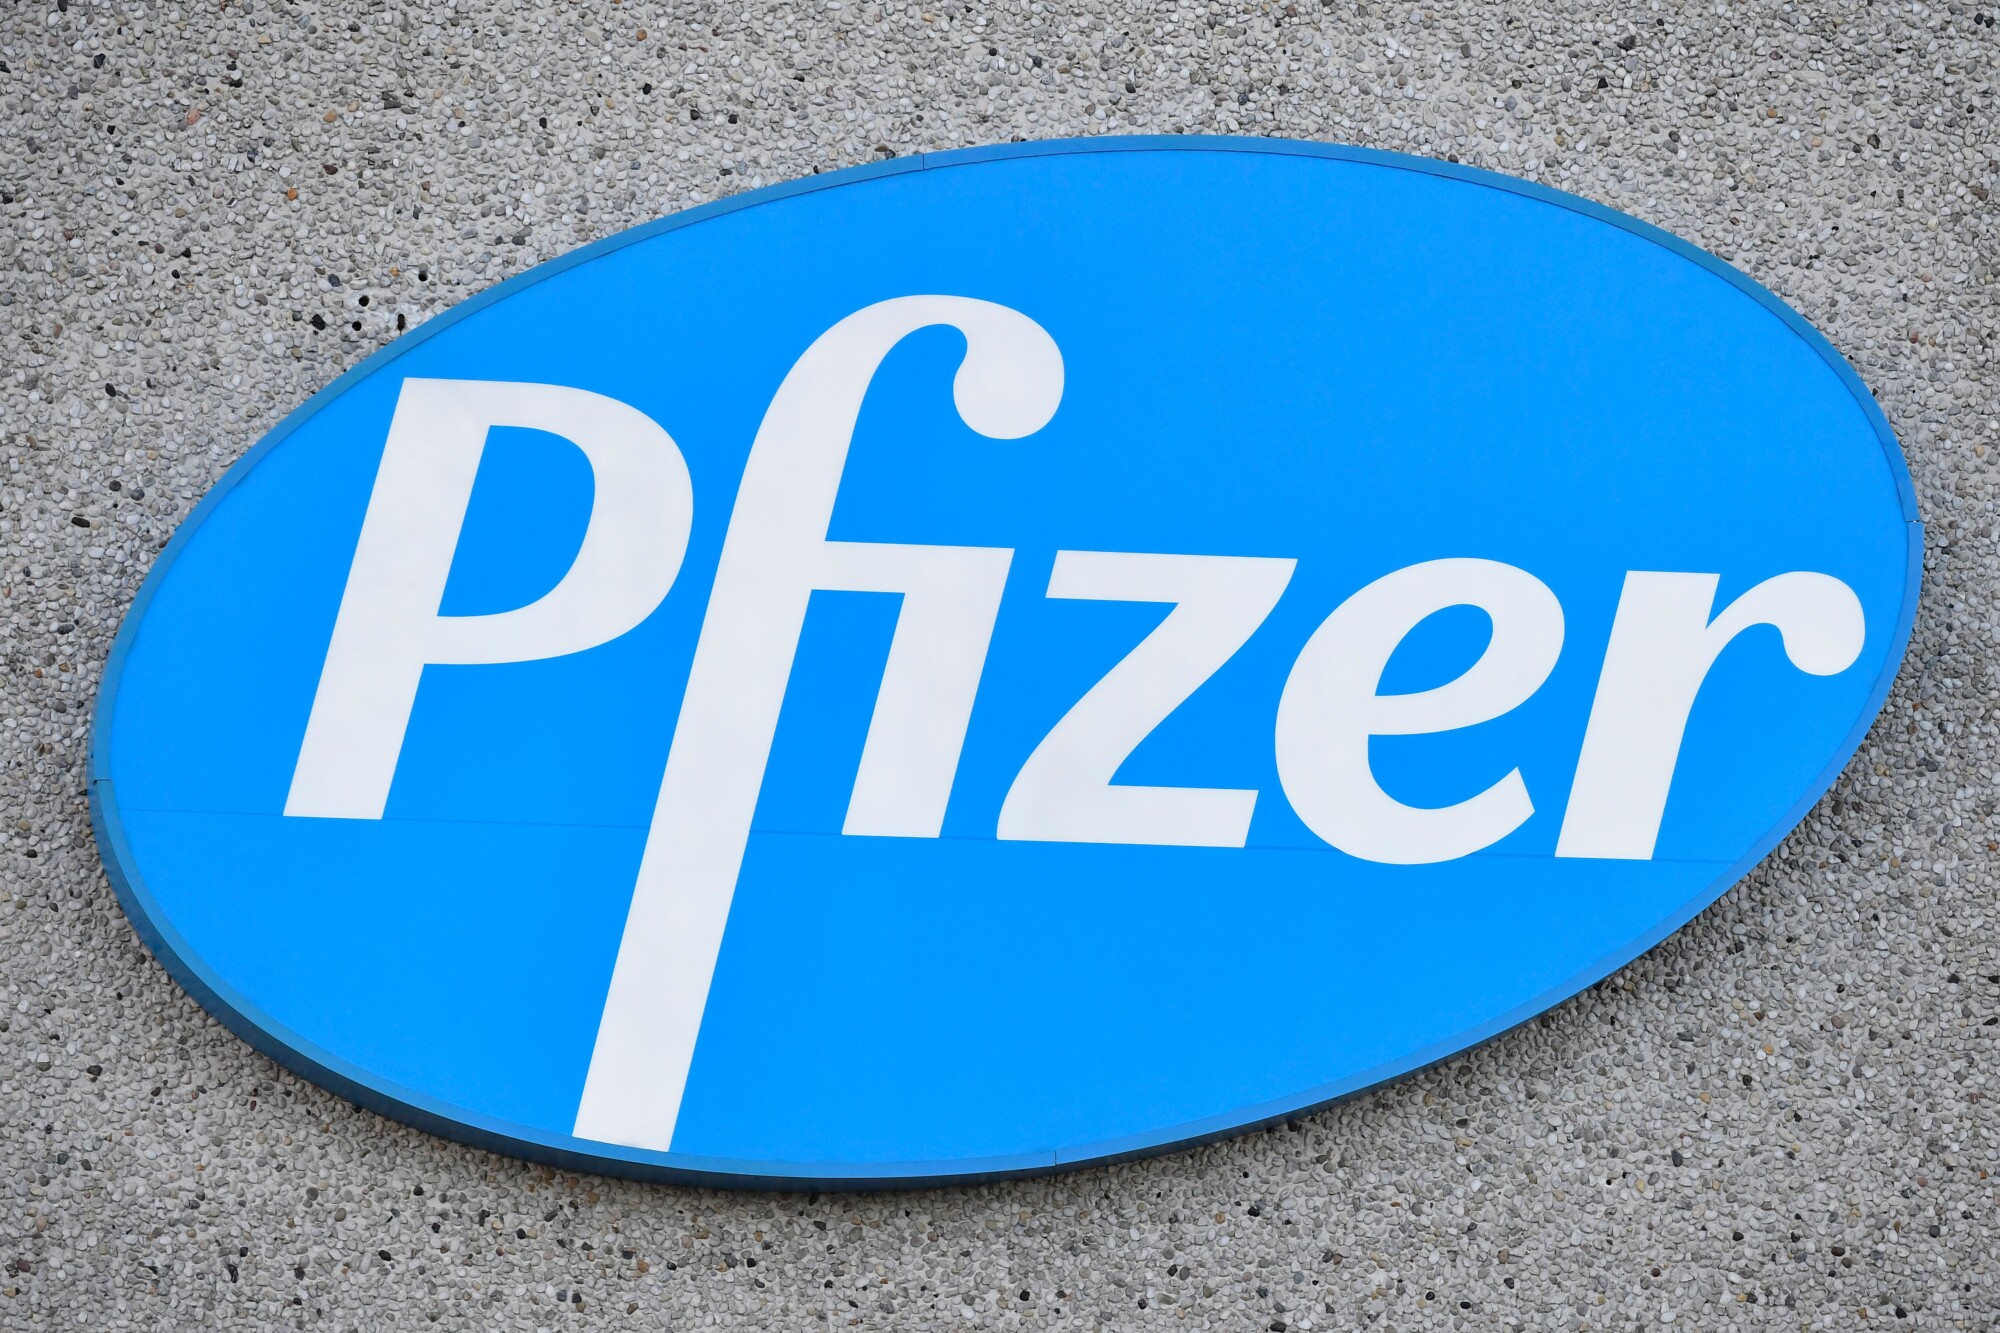 Pfizer Recalling Some Blood Pressure Drug Products With ‘Above Acceptable’ Levels of Cancer-Causing Impurity